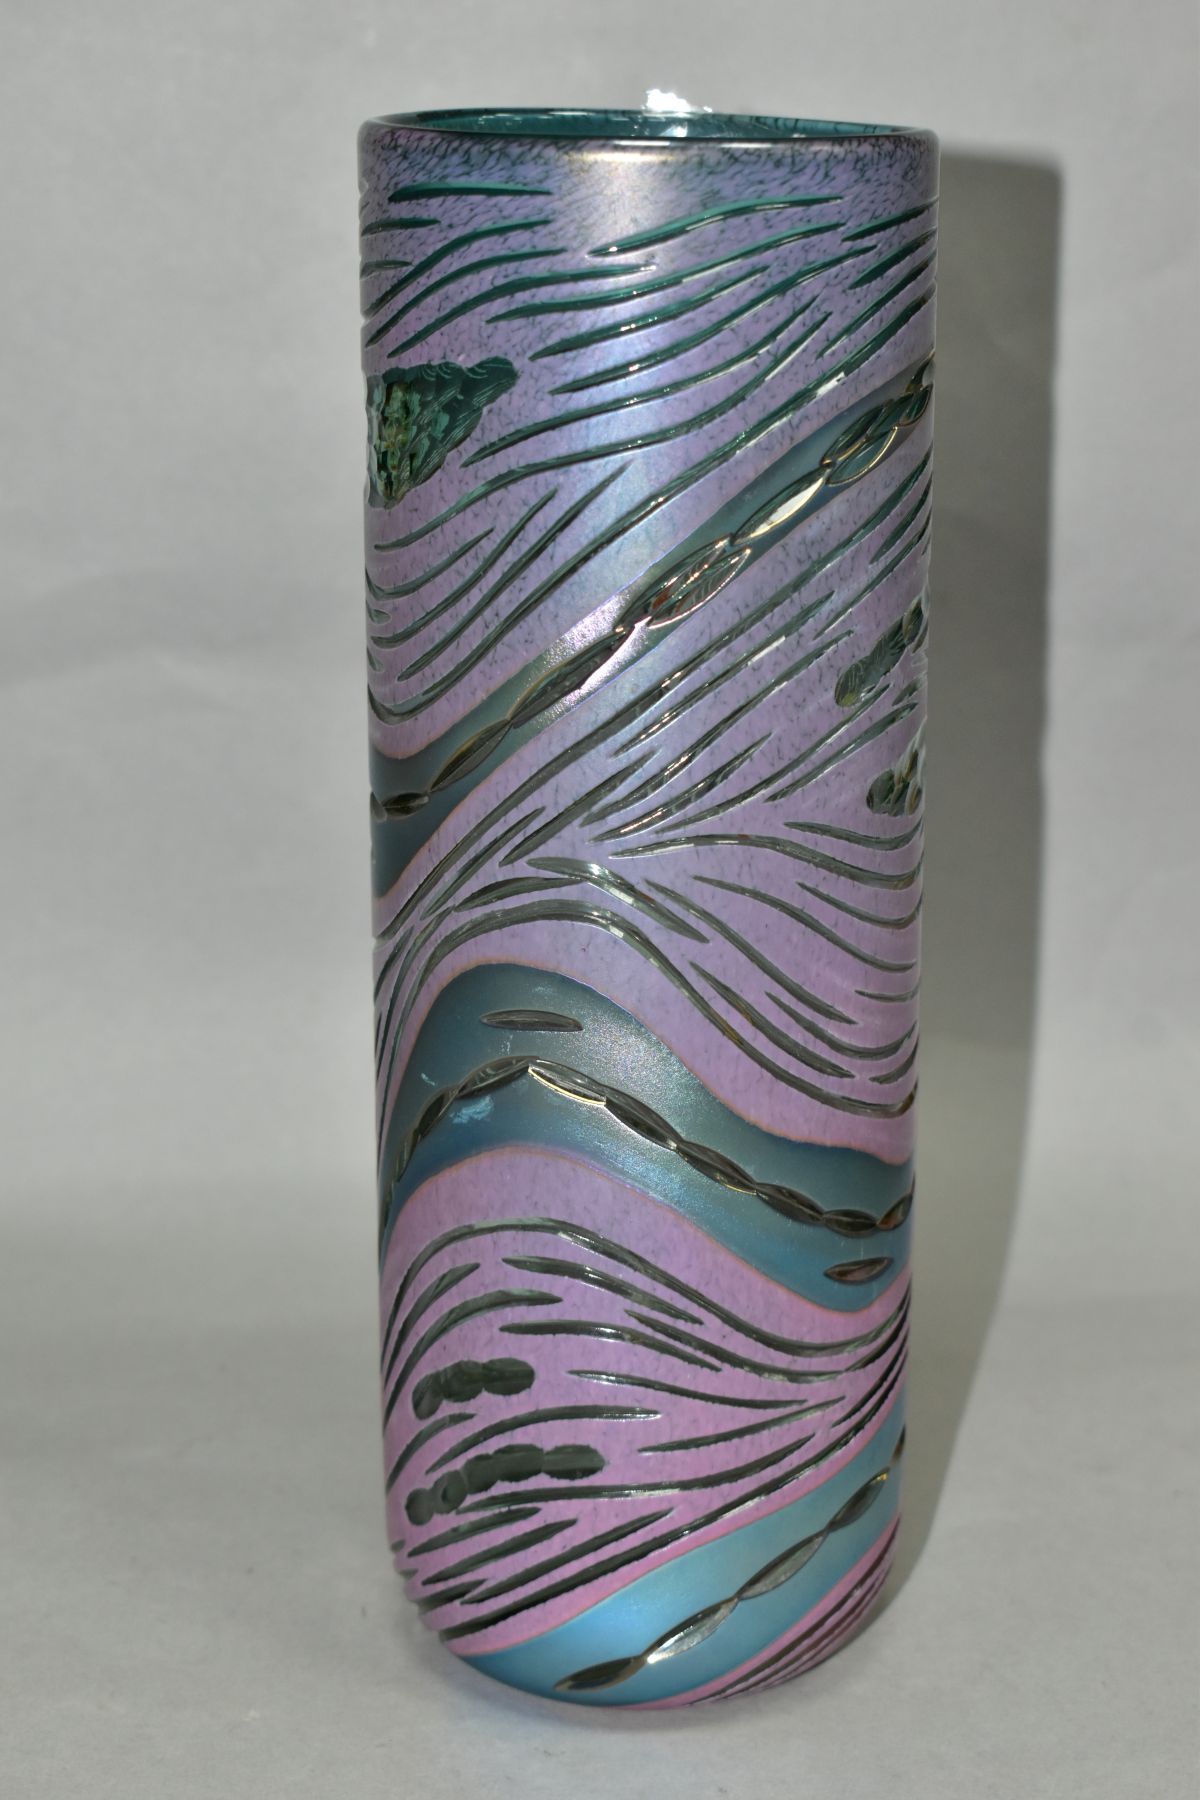 RICHARD GOLDING FOR OKRA GLASS, a cylindrical purple/blue iridescent vase with a textured surface, - Image 2 of 6